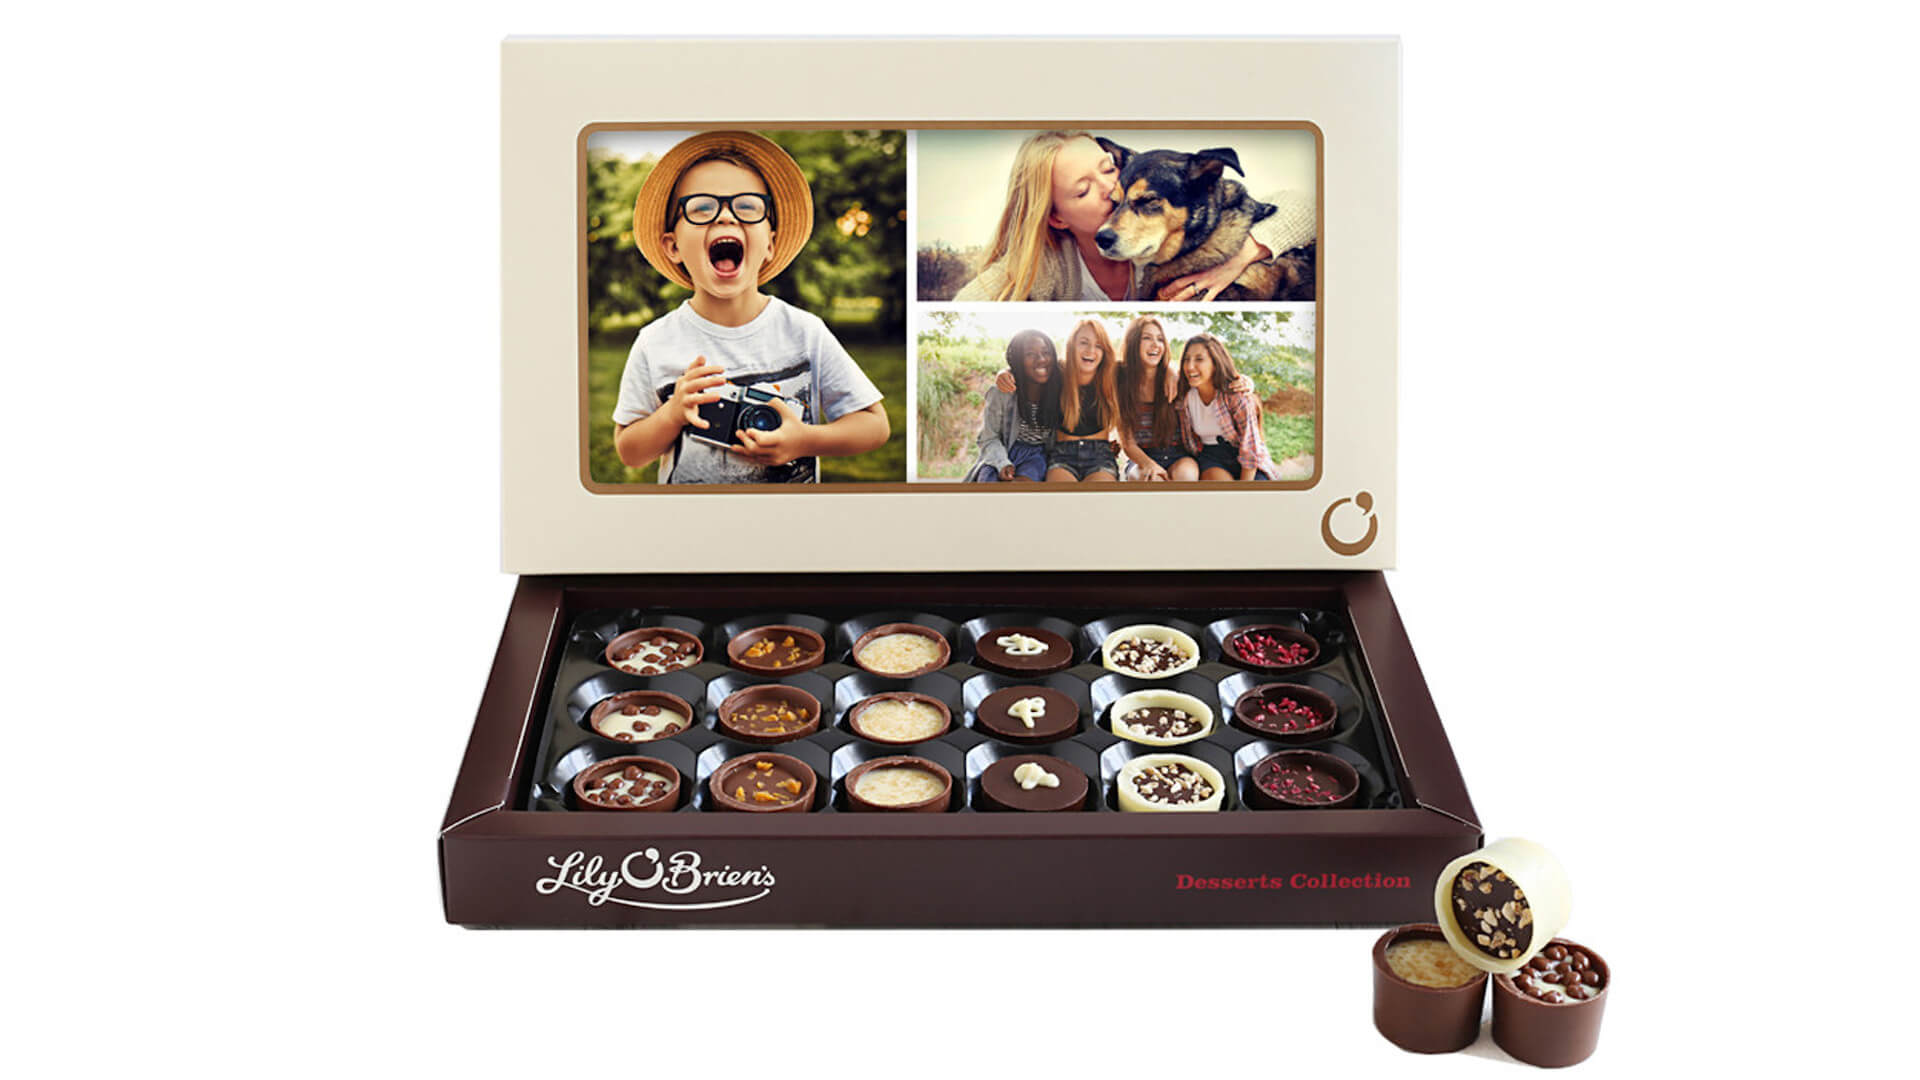 Lily Obrien's Chocolate Personalised Photo Box